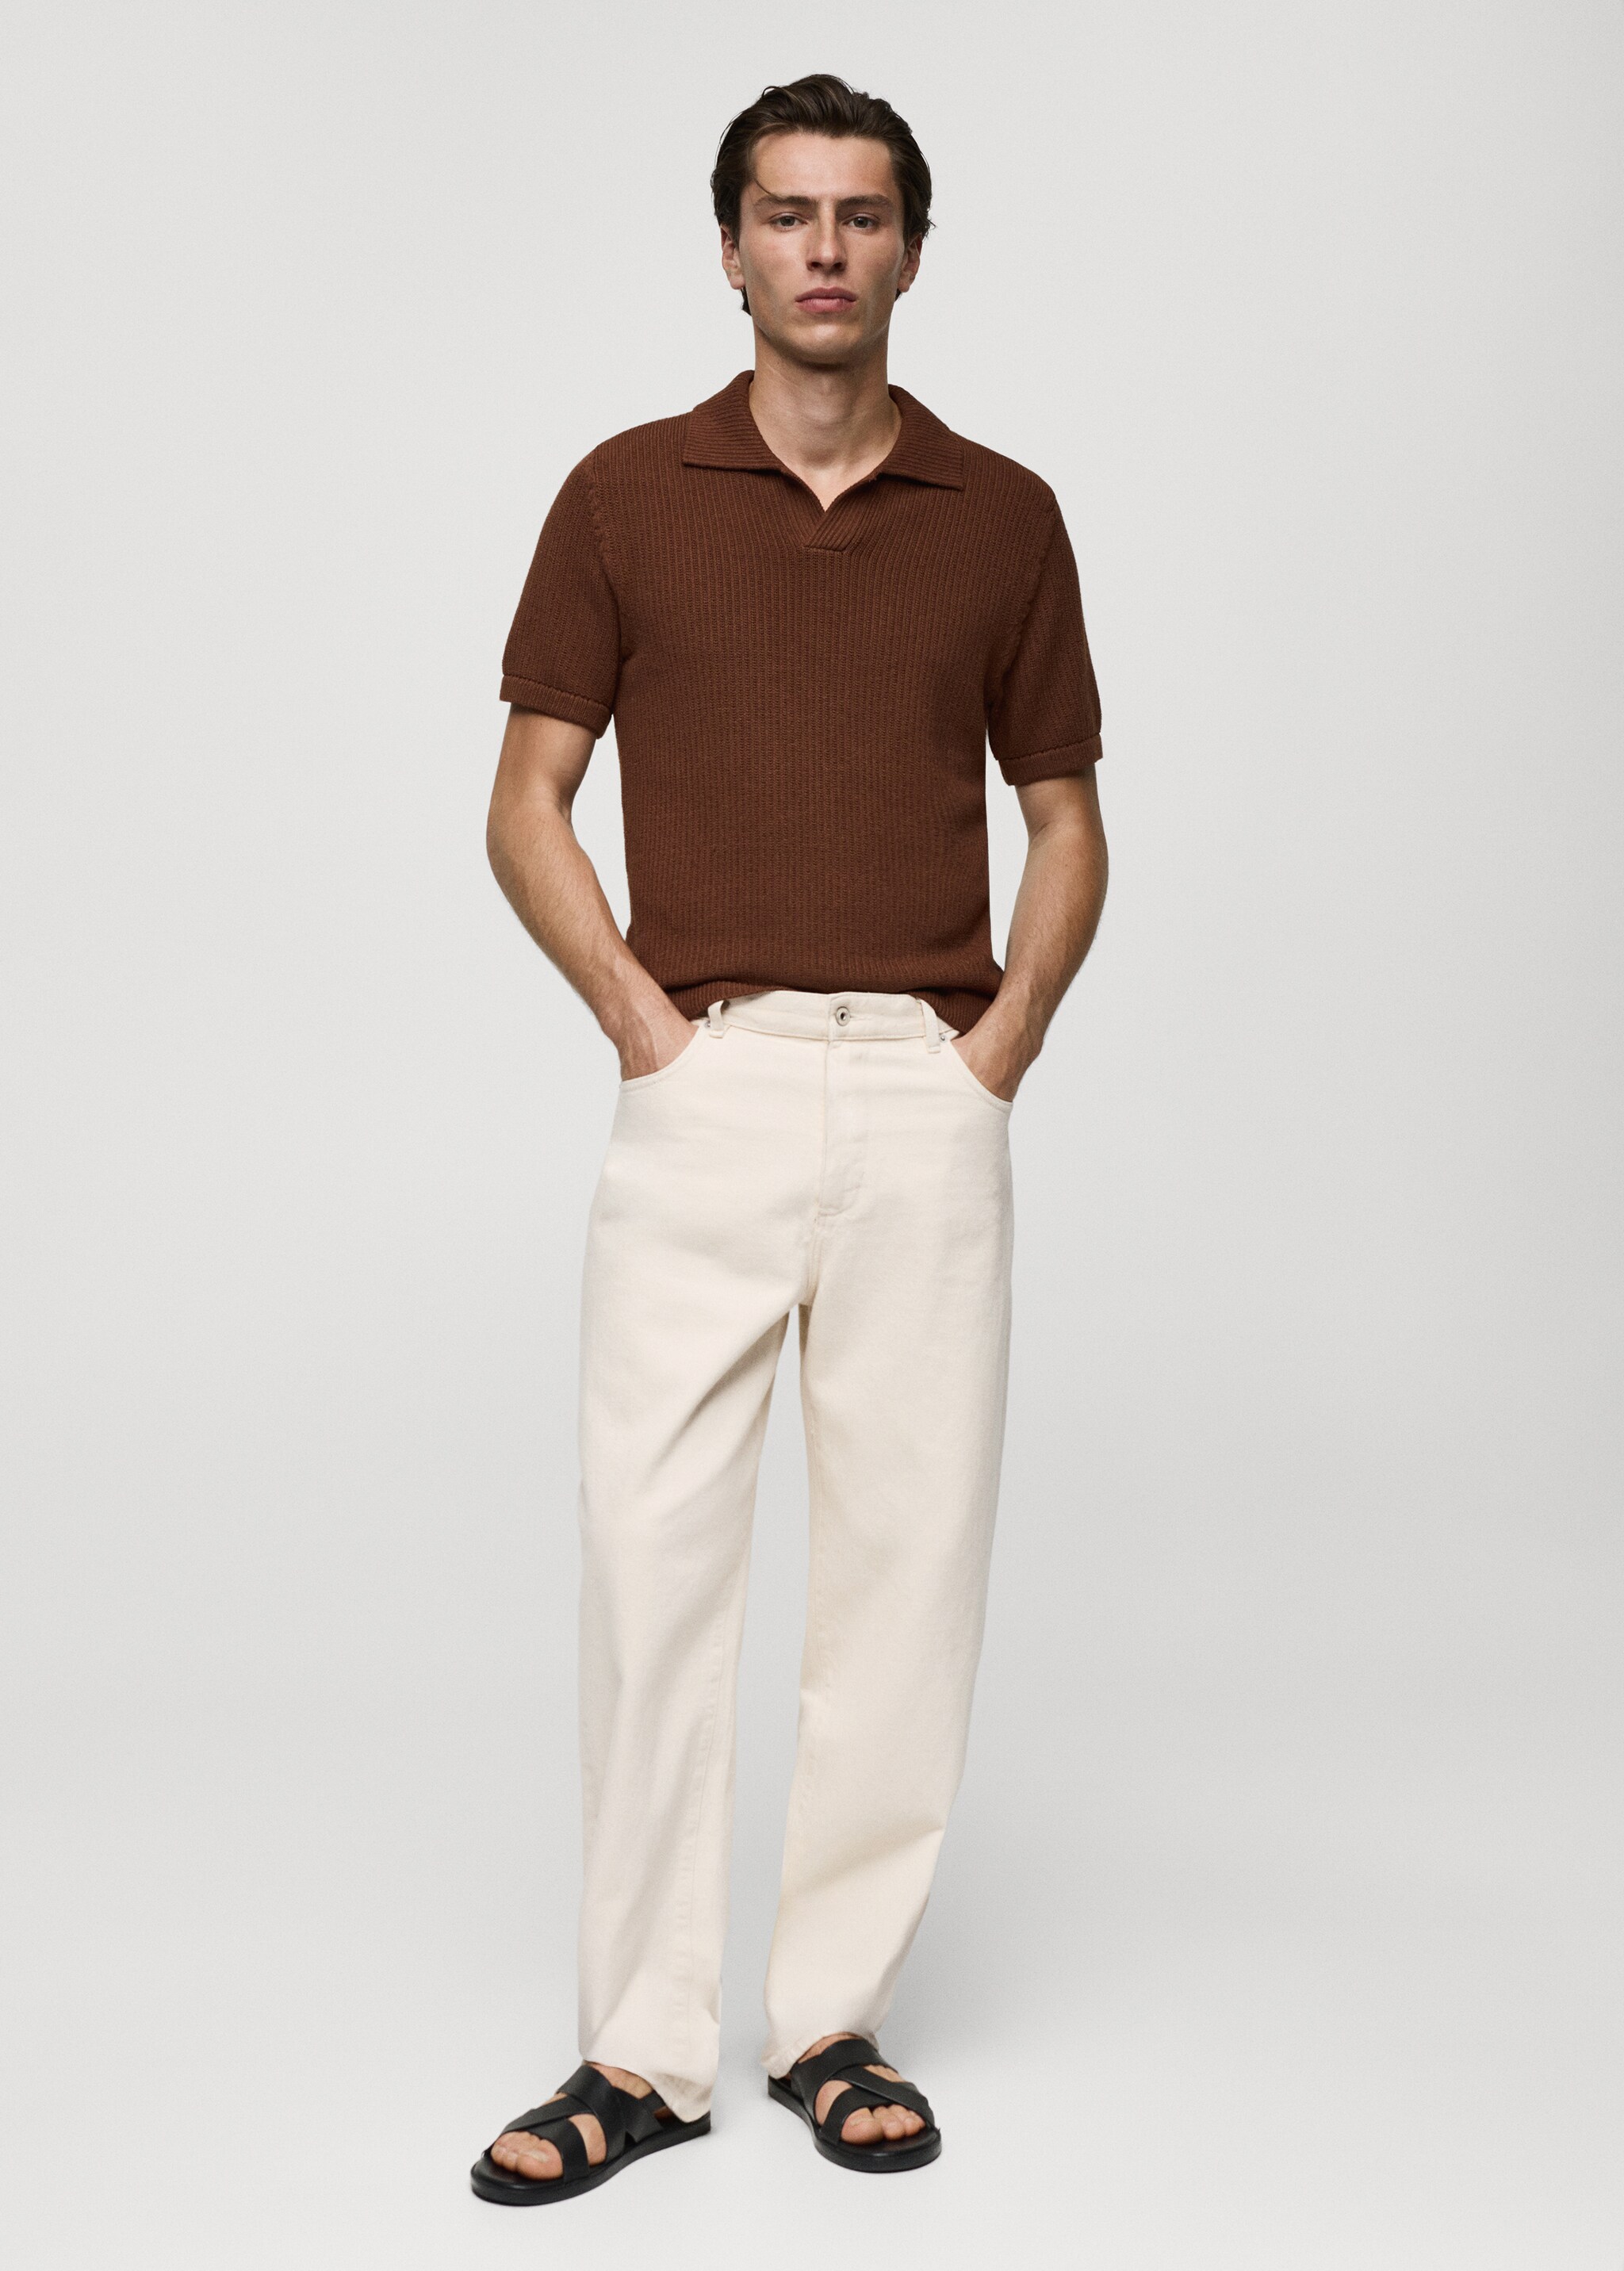 Relaxed fit cotton jeans - General plane